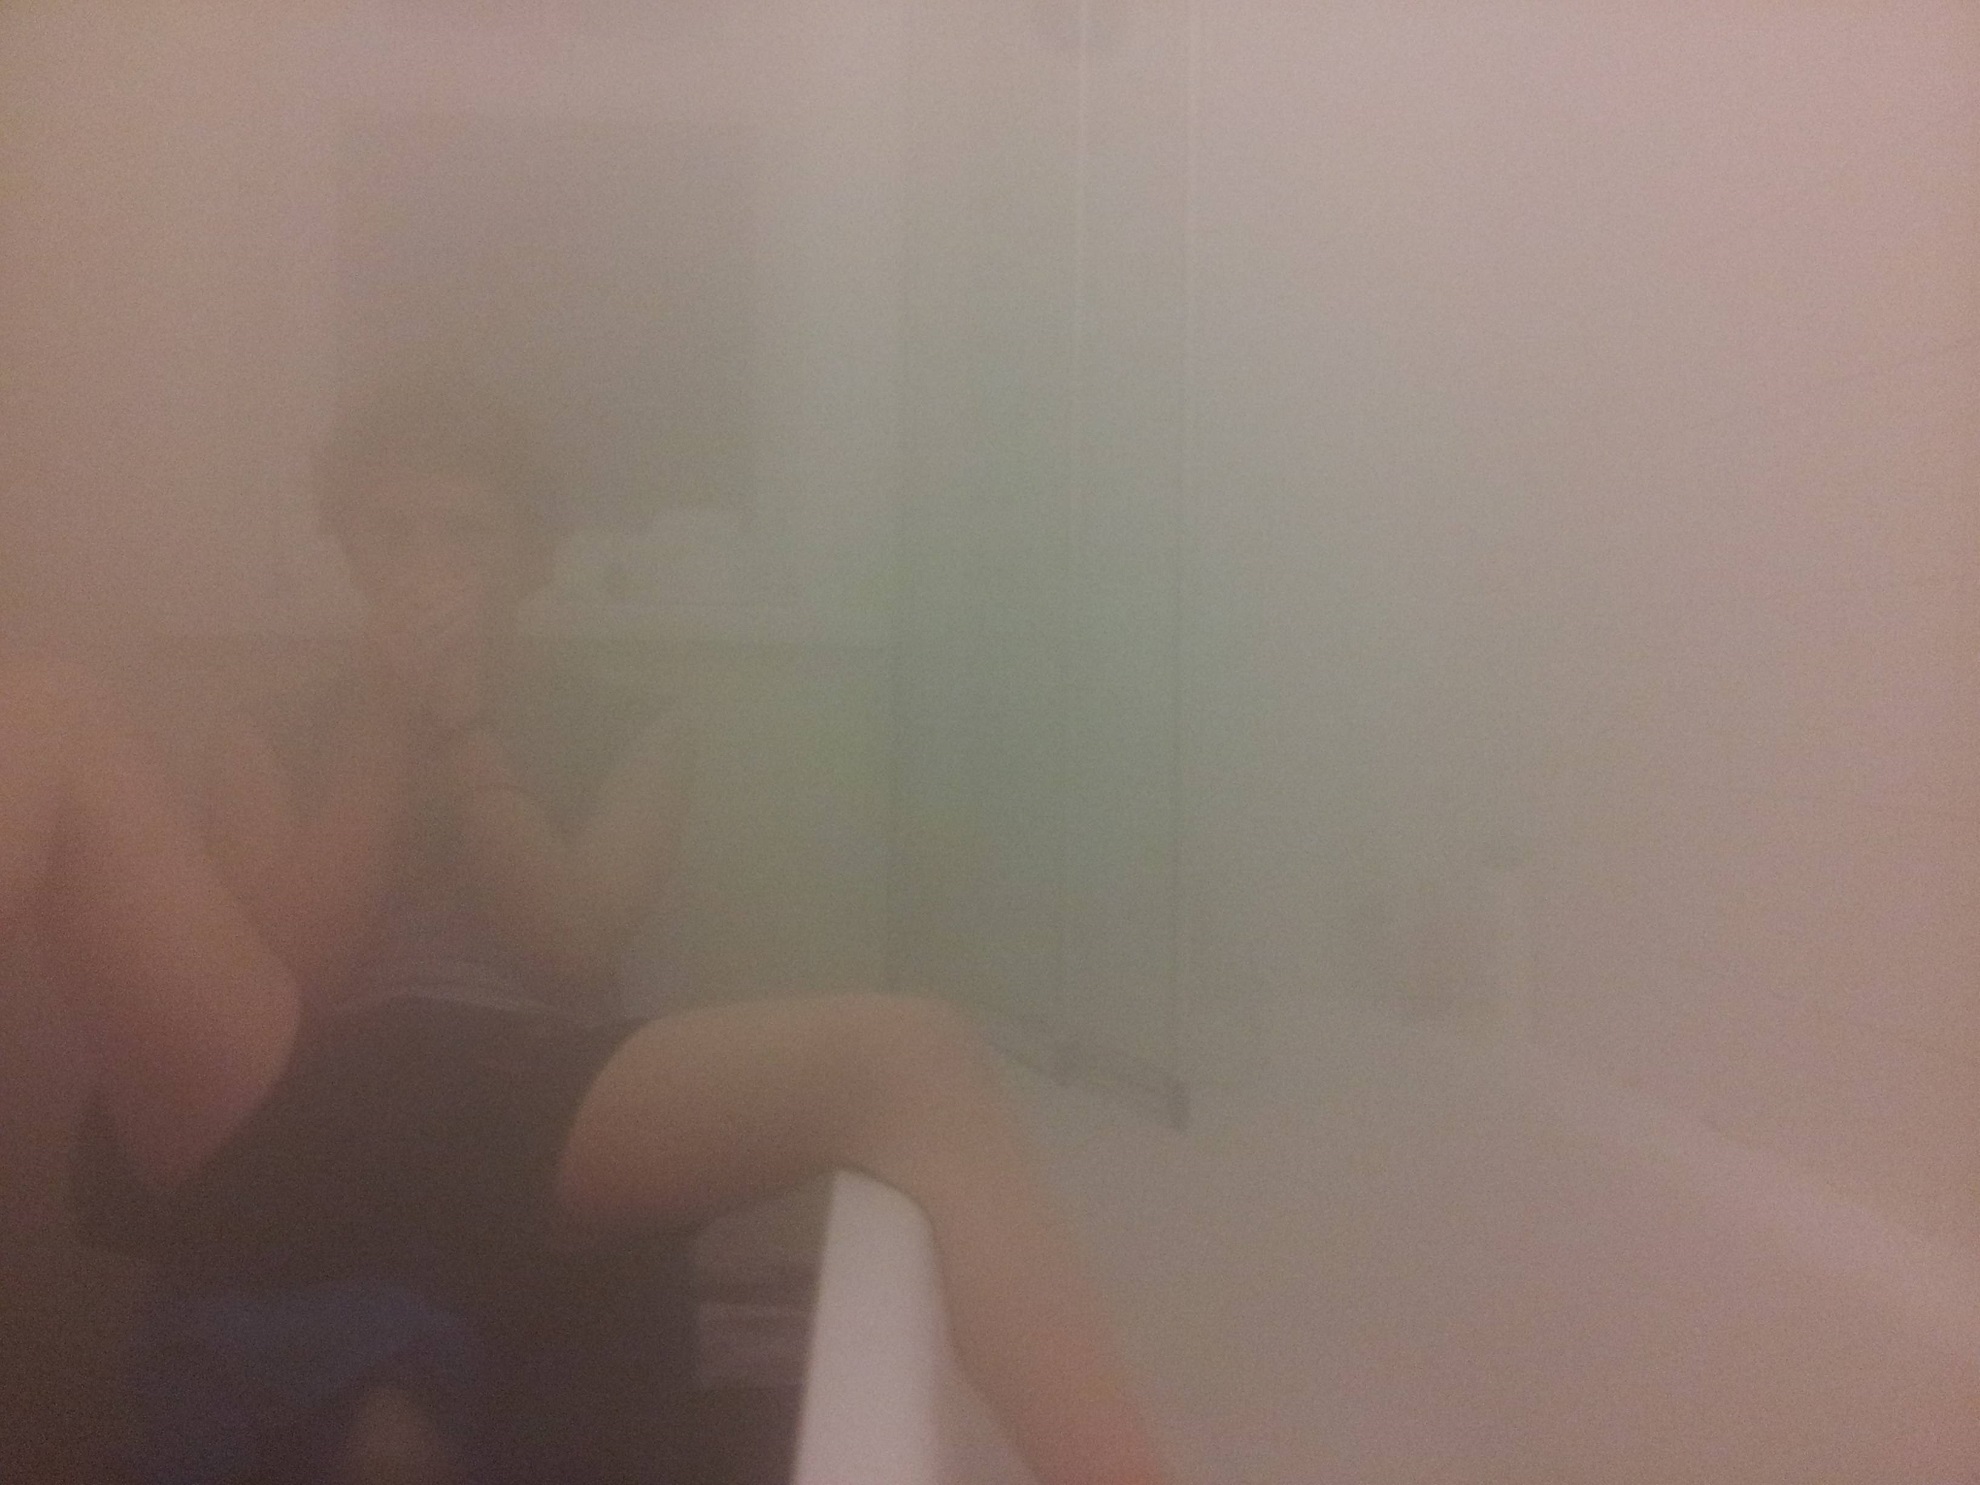 Hot boxing a shower